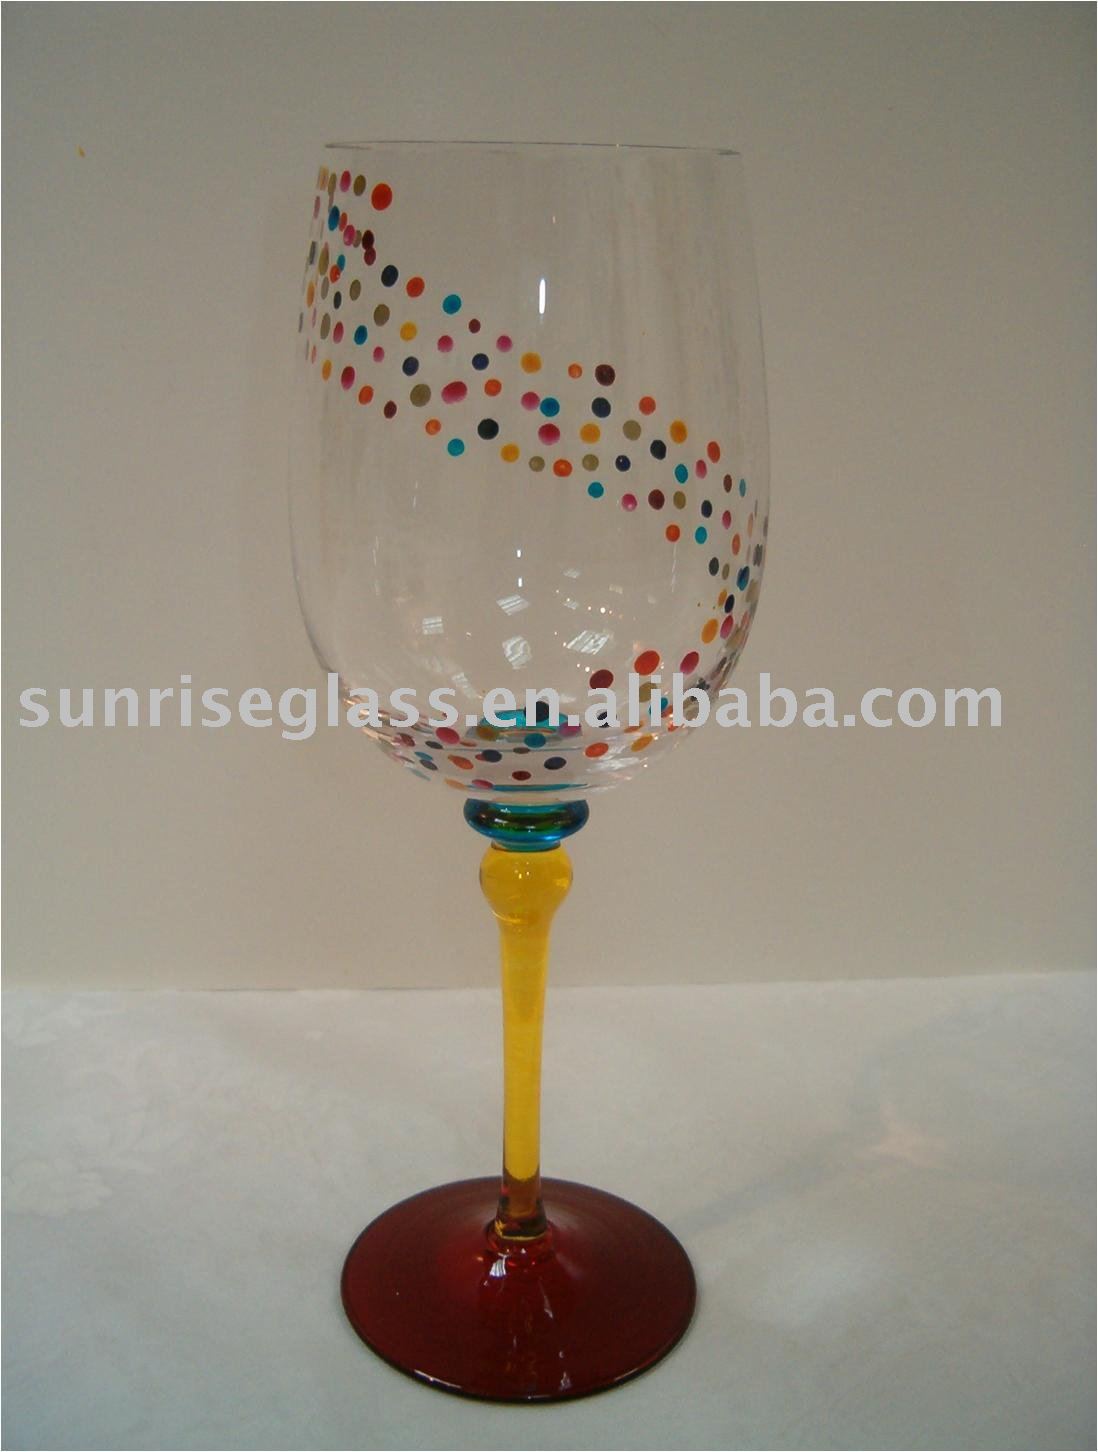 wine glassesâ€¦.come  painting  Ideas for glasses paint wine with painting glass of  creative me